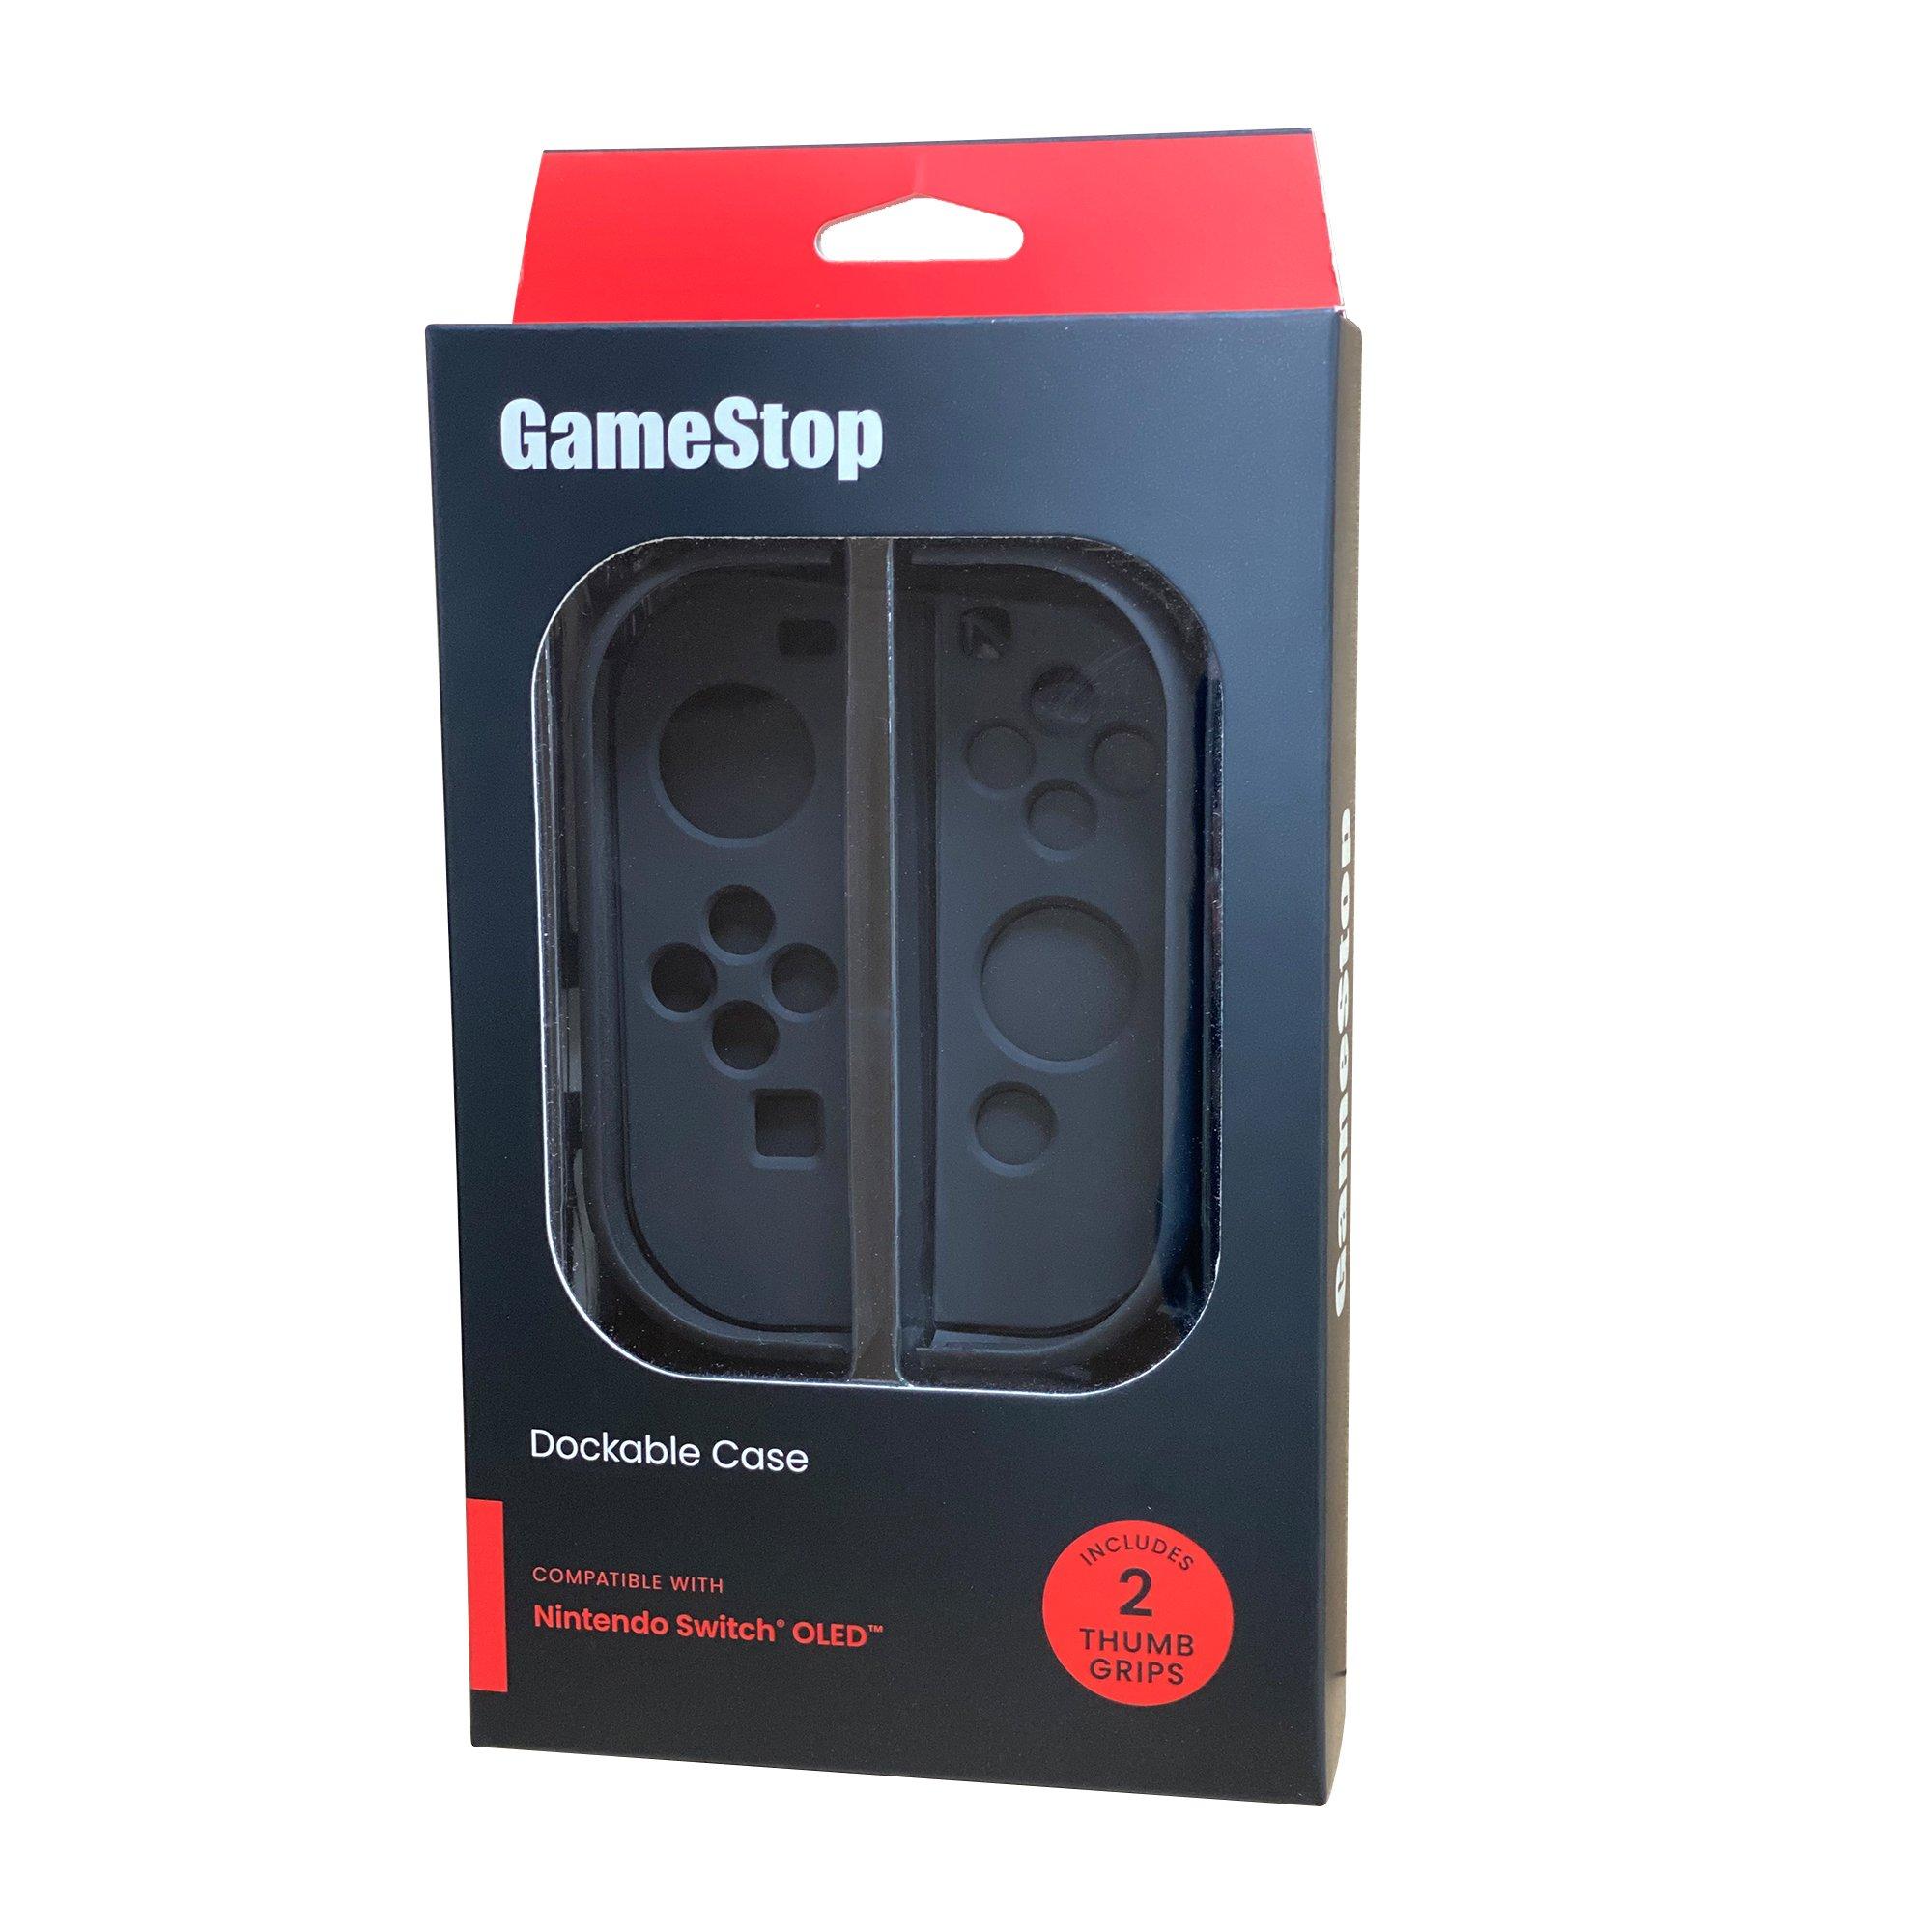 GameStop 2 Gripper Dockable Plastic Case with Rubber Finishing for Nintendo Switch OLED